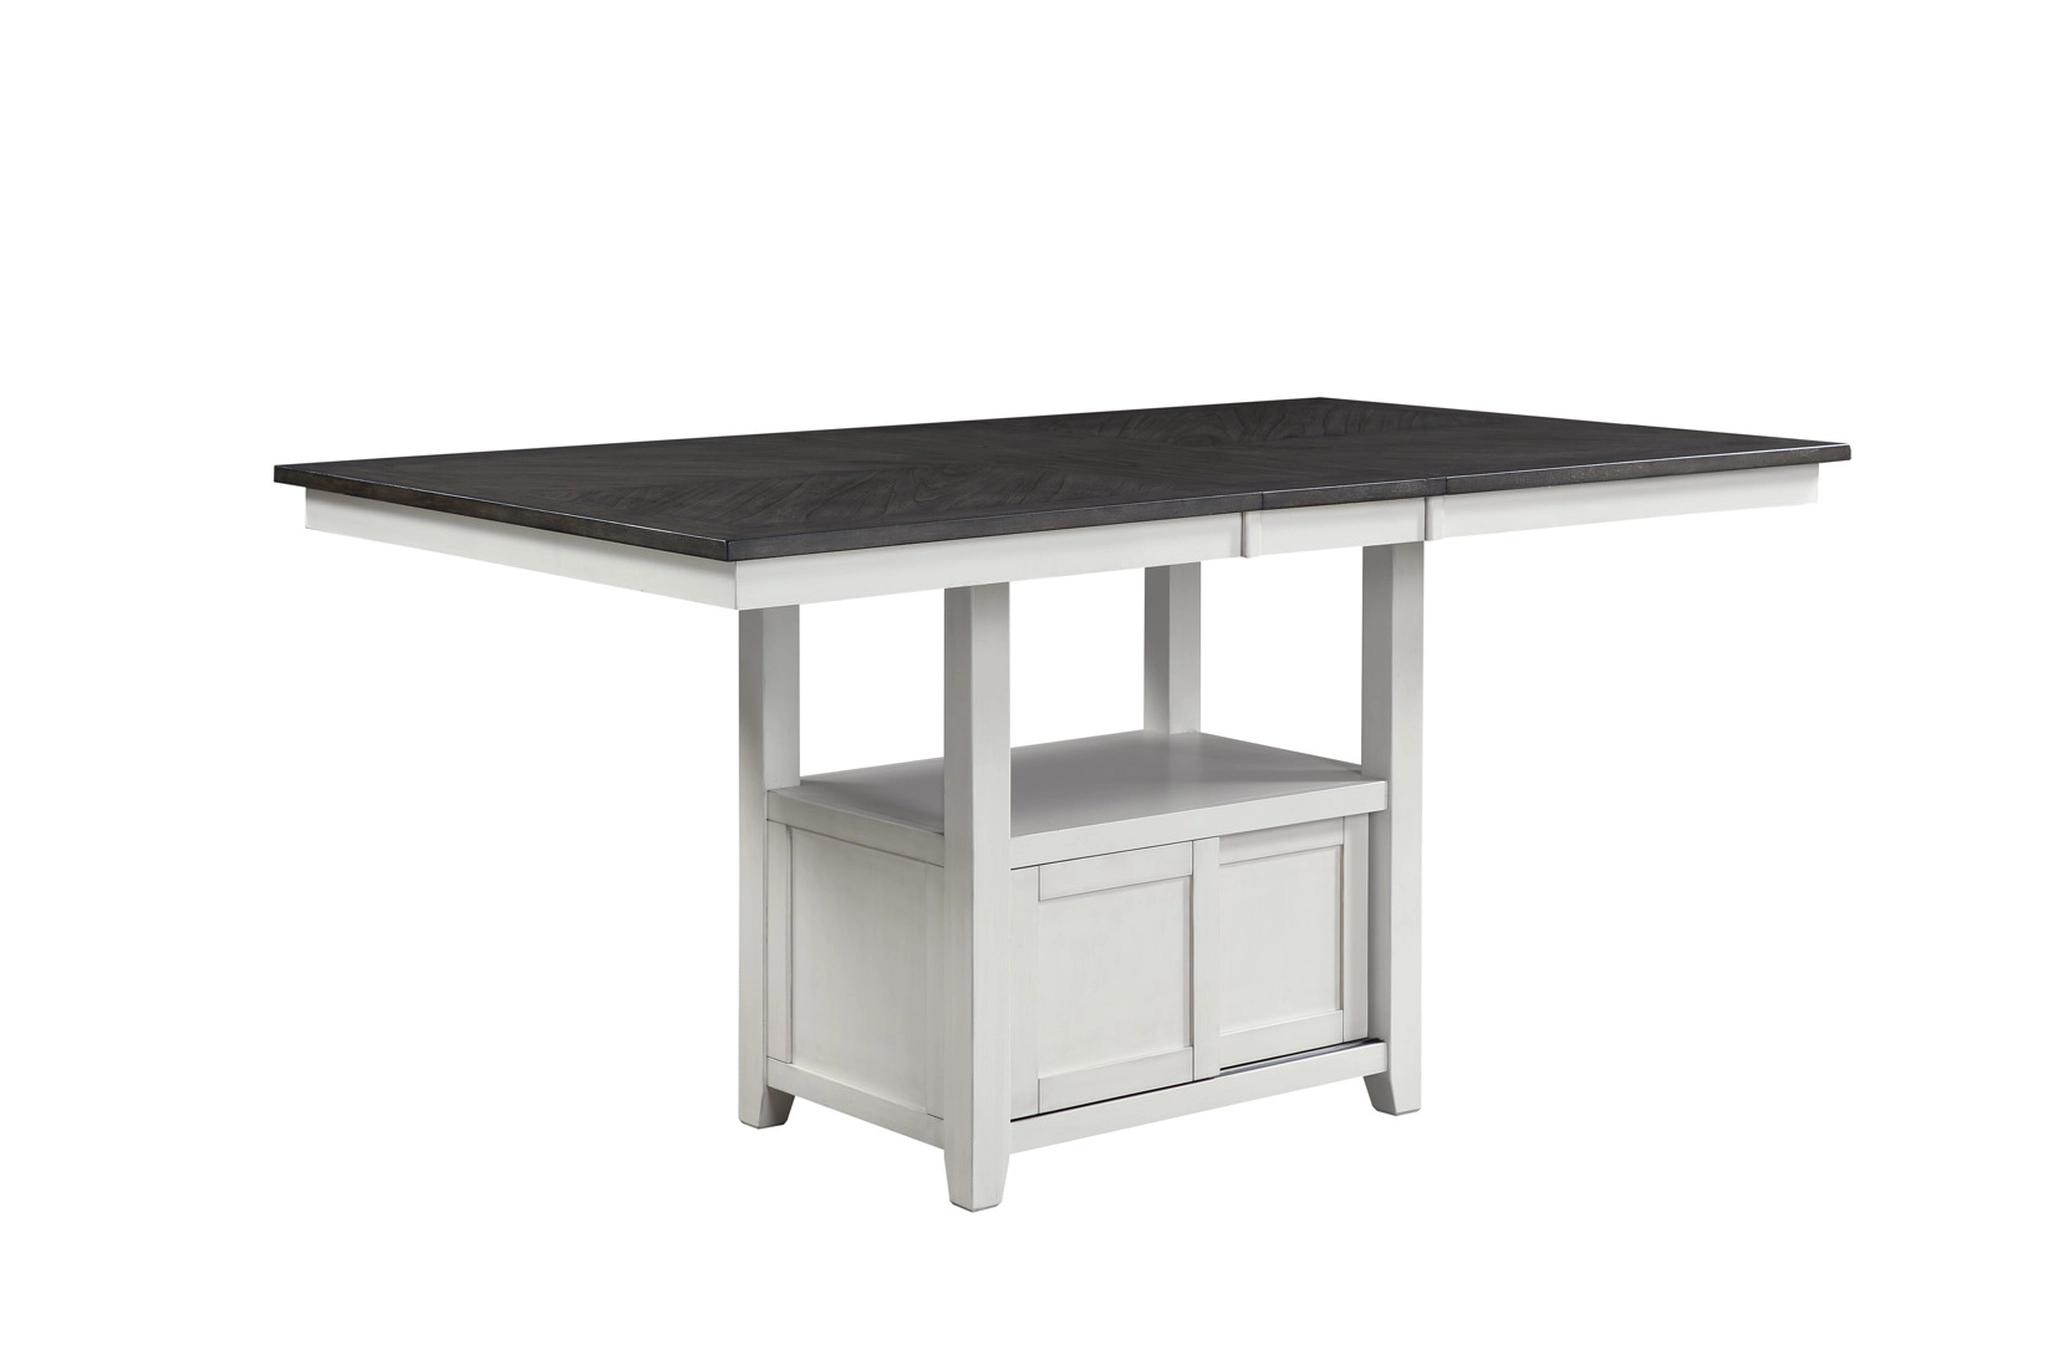 Traditional, Cottage Counter Height Table Buford 2773CG-T-4272 in White, Gray 